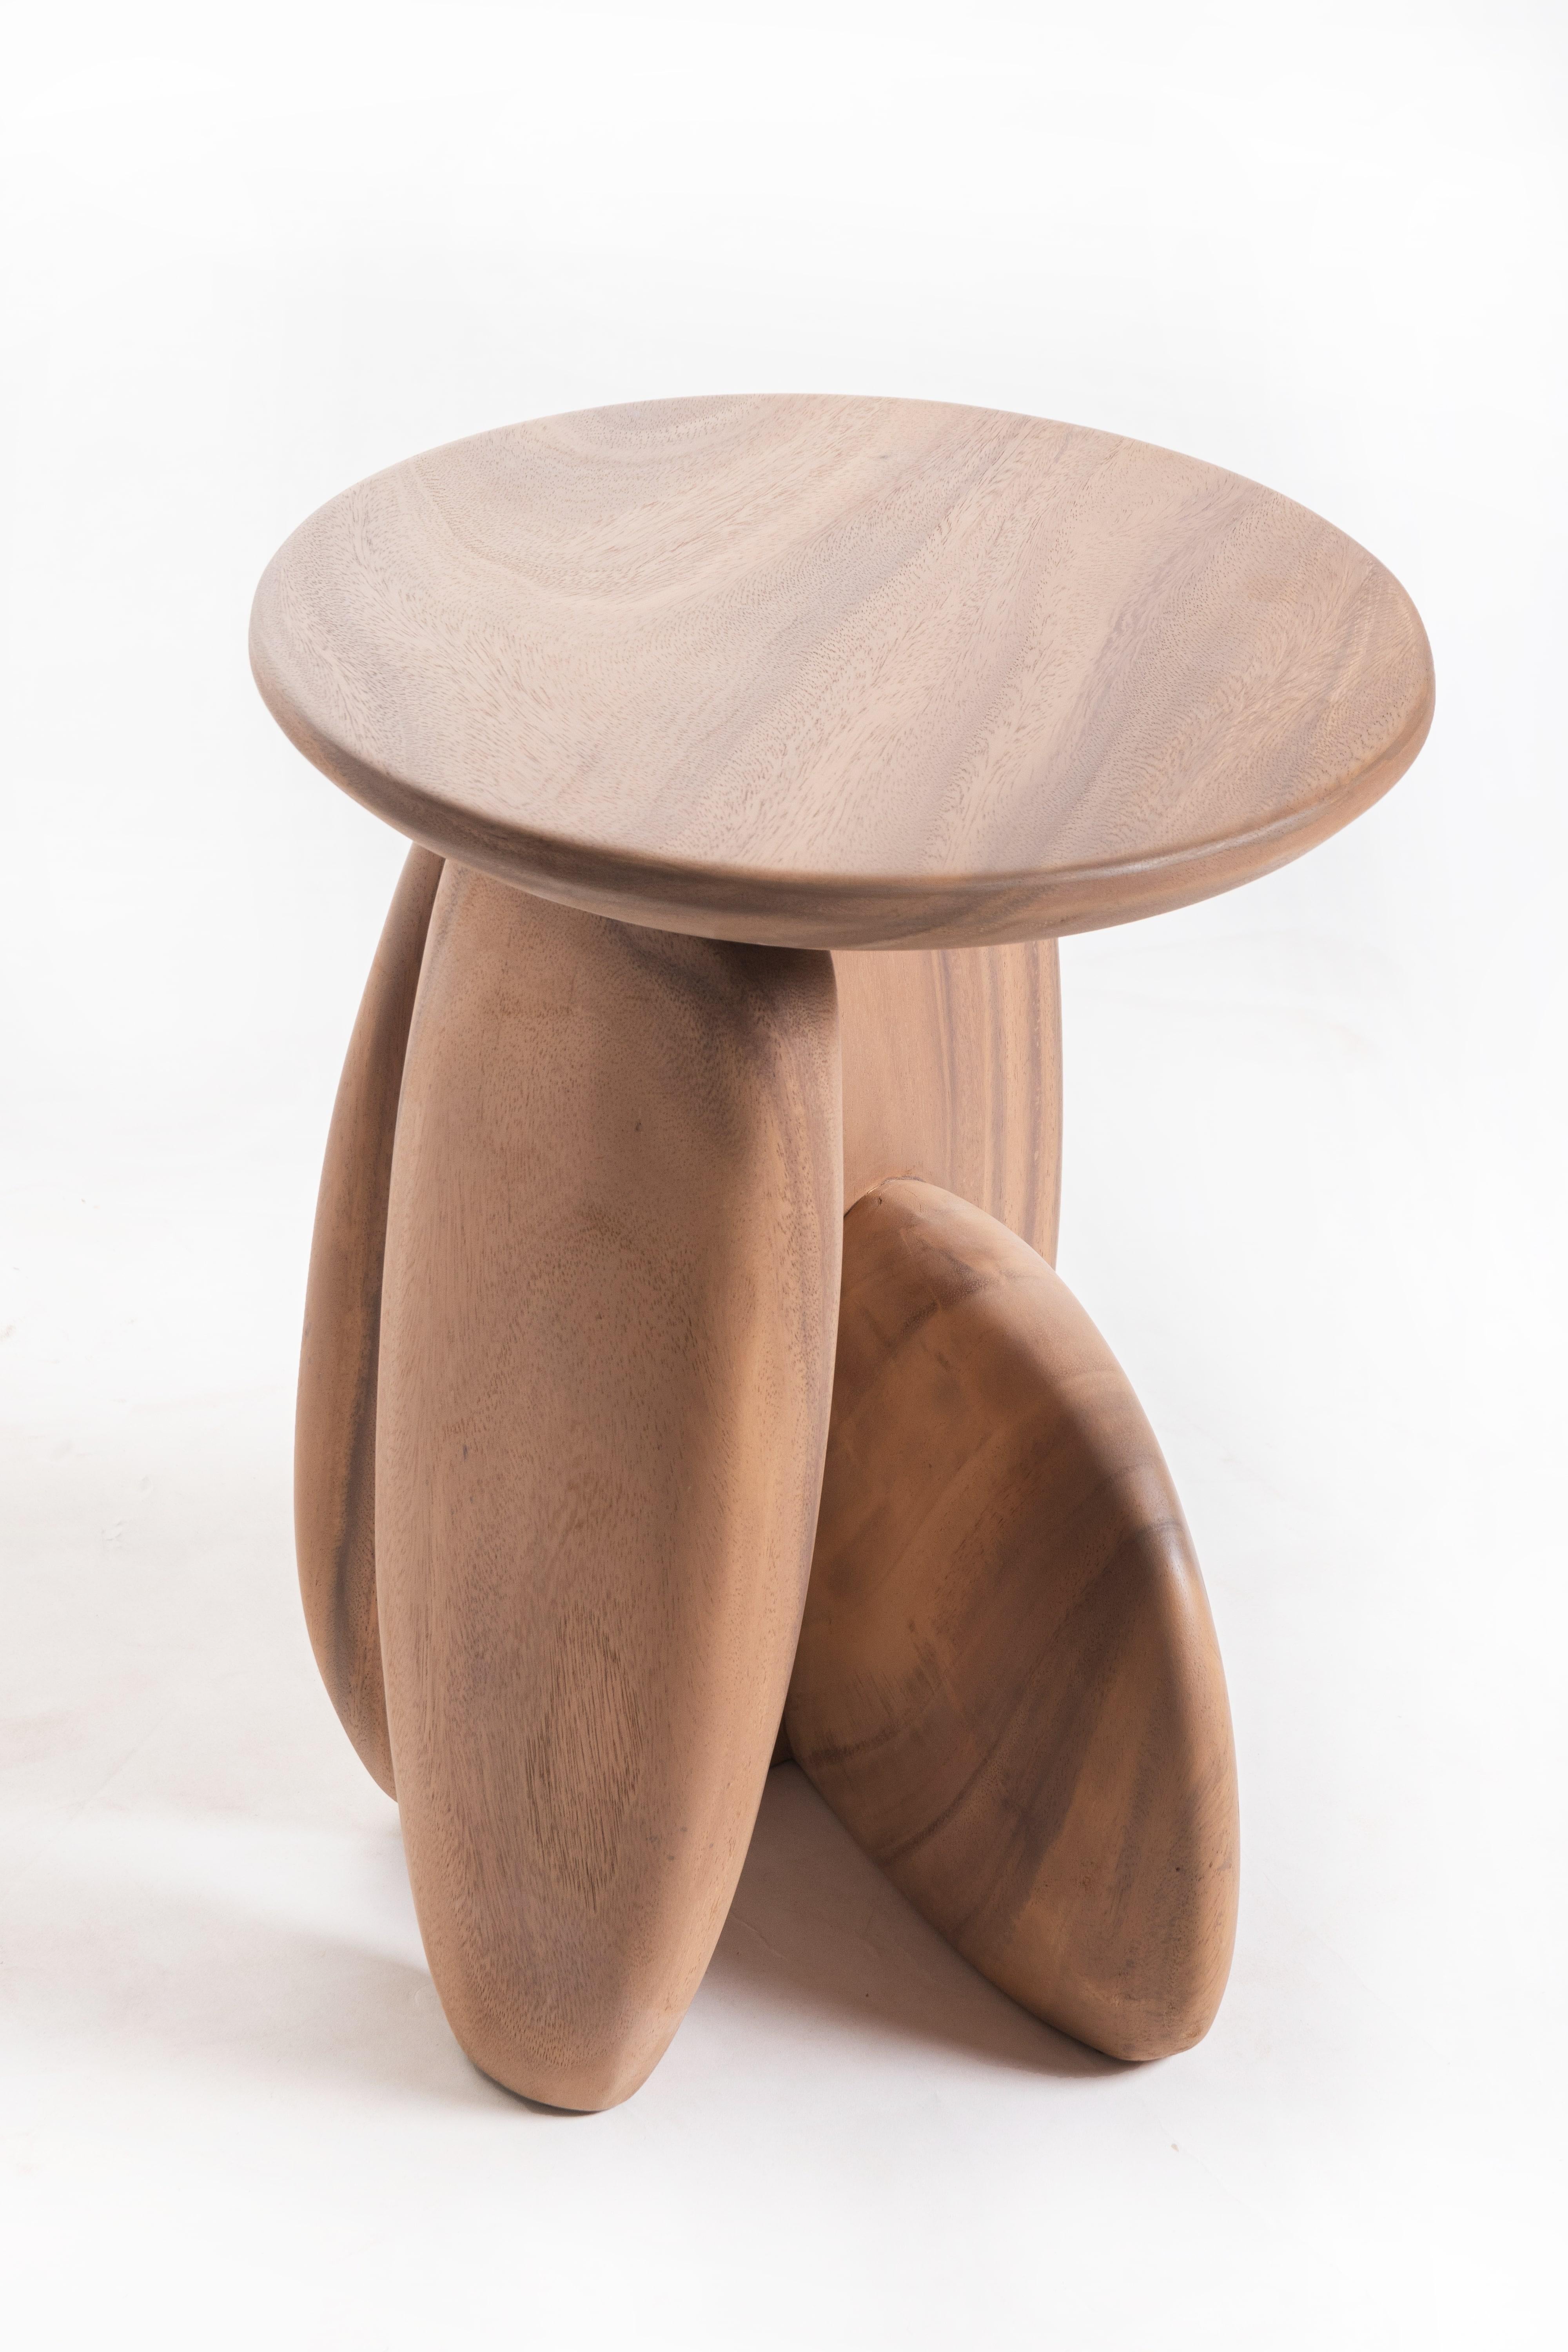 Hand-Crafted Pebble Stool Type 02, Natural Light Acacia Wood For Sale